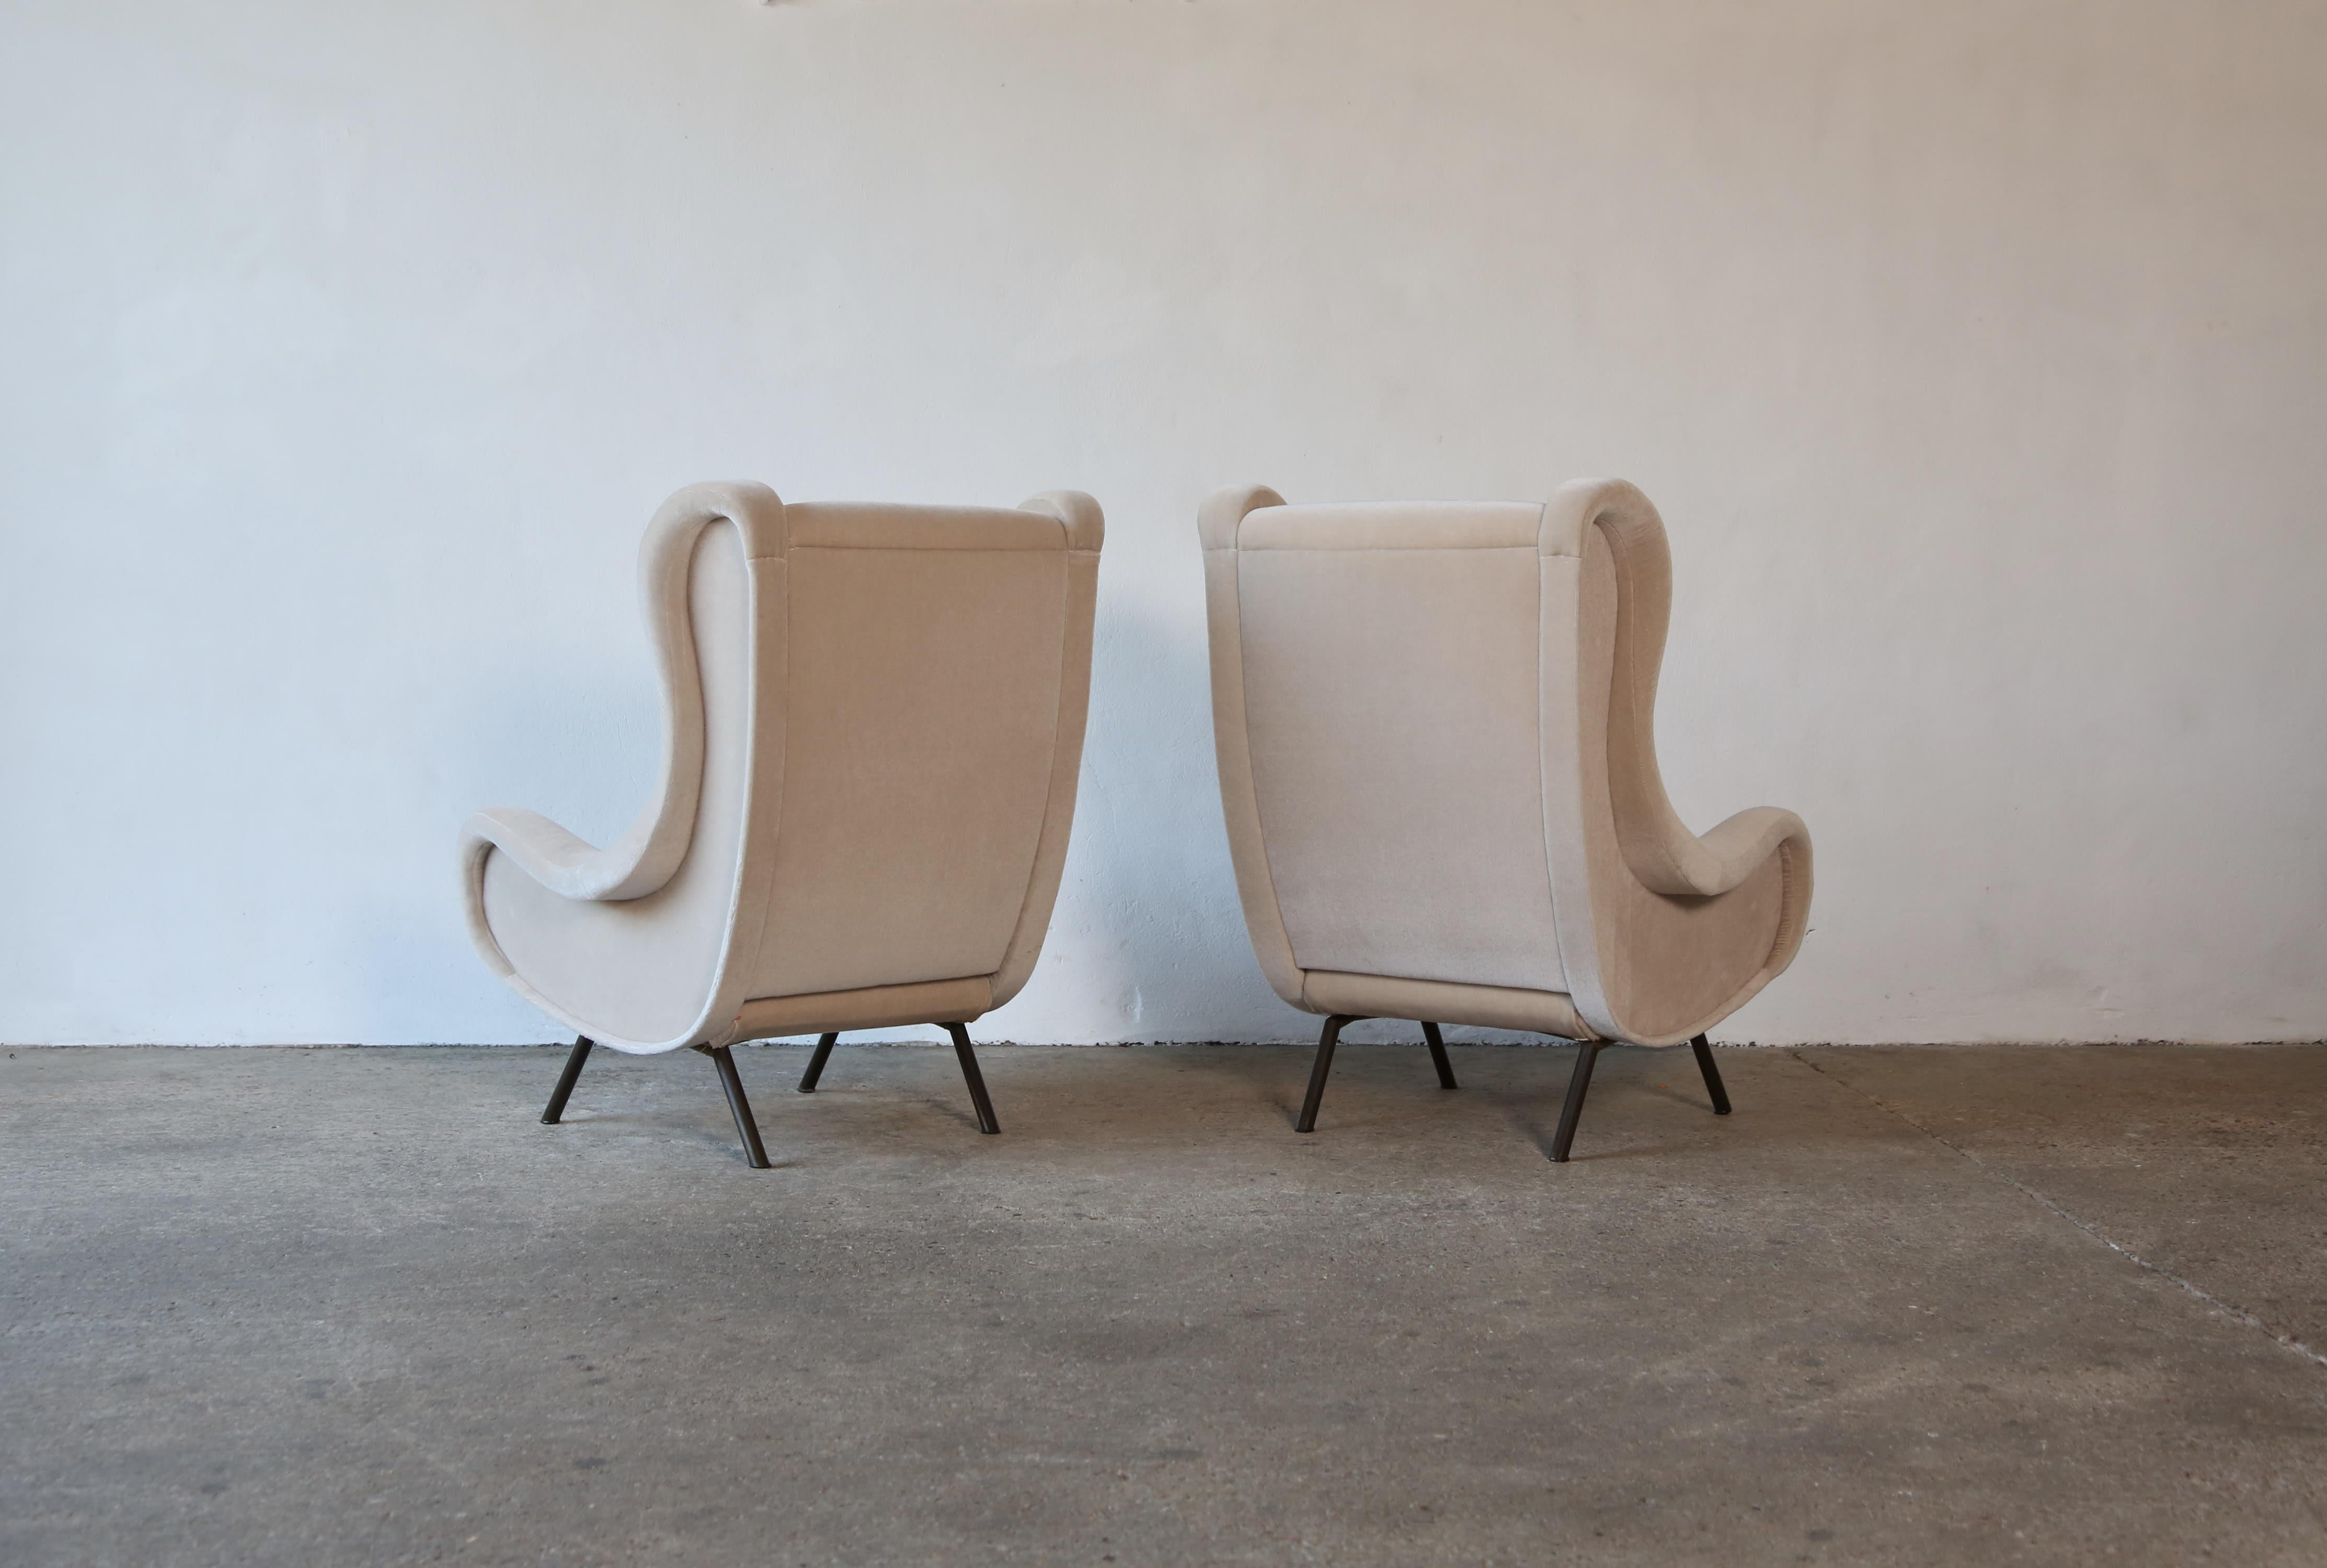 Marco Zanuso Senior Chairs, Pure Mohair, Arflex, Italy, 1960s In Good Condition For Sale In London, GB